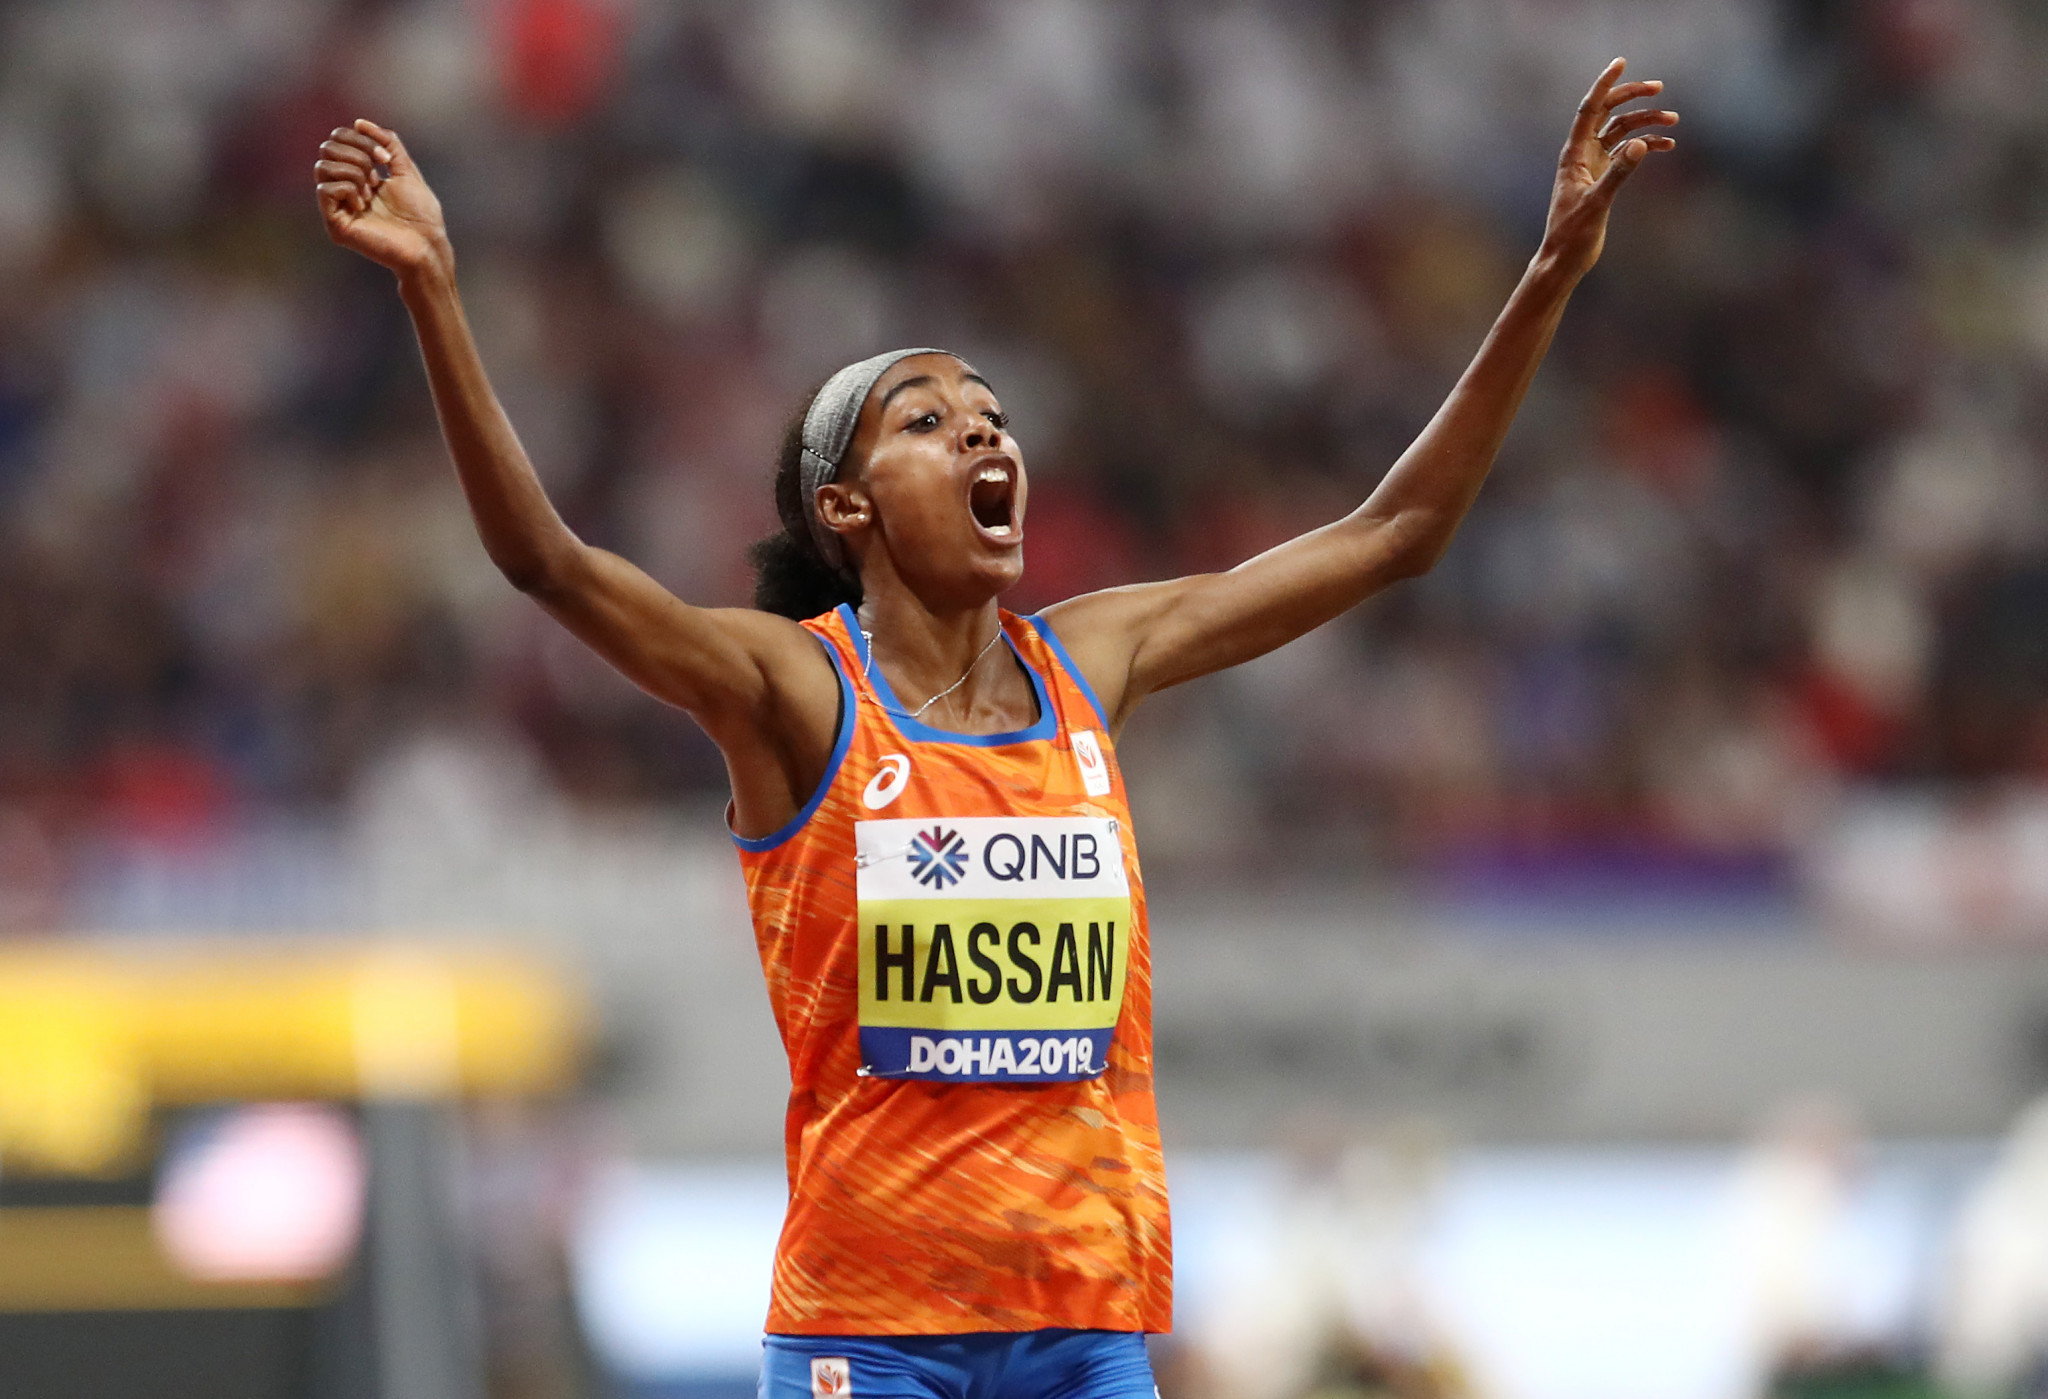 Sifan Hassan completed her golden double with 1500m victory at the IAAF World Championships in Doha ©Getty Images